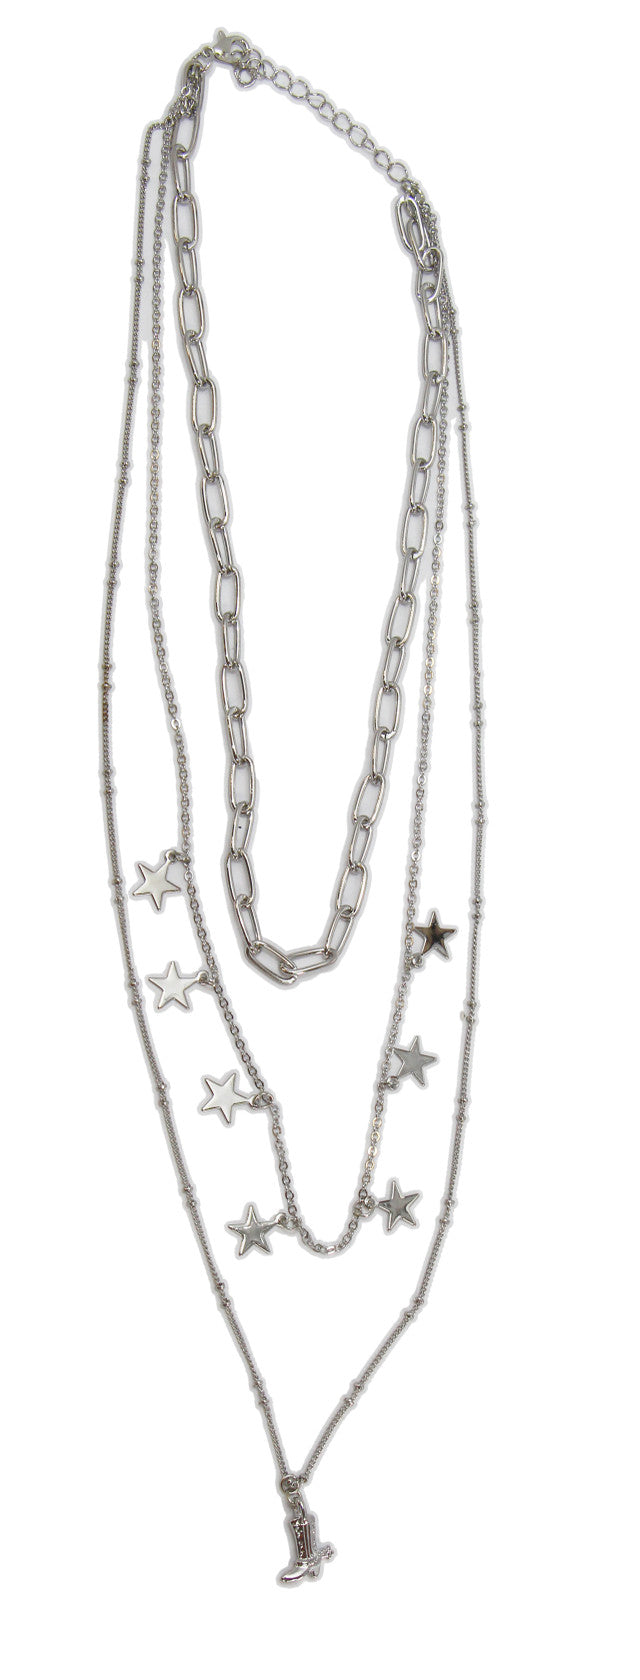 West & Co. Triple Layered Sliver Chain, Stars and Cowboy Boots Necklace